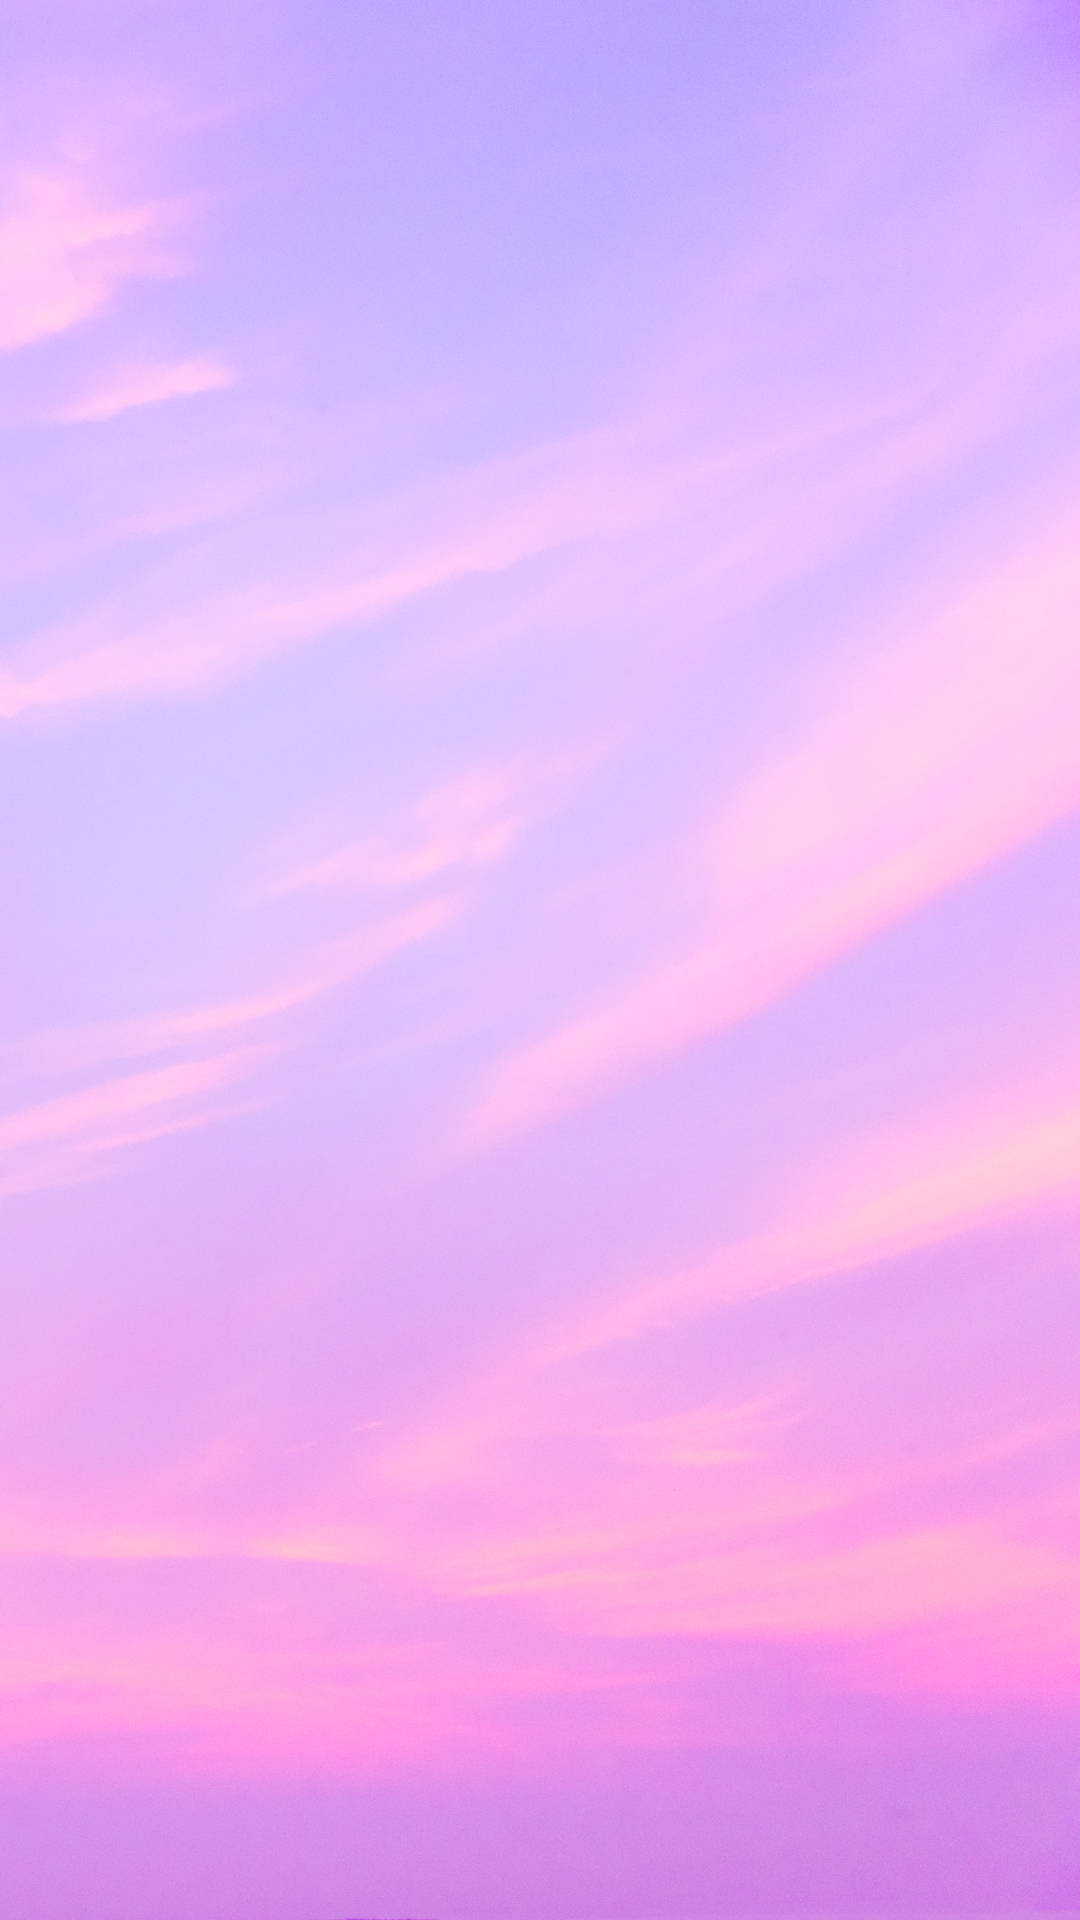 IPhone Pink Aesthetic Wispy Clouds Wallpaper